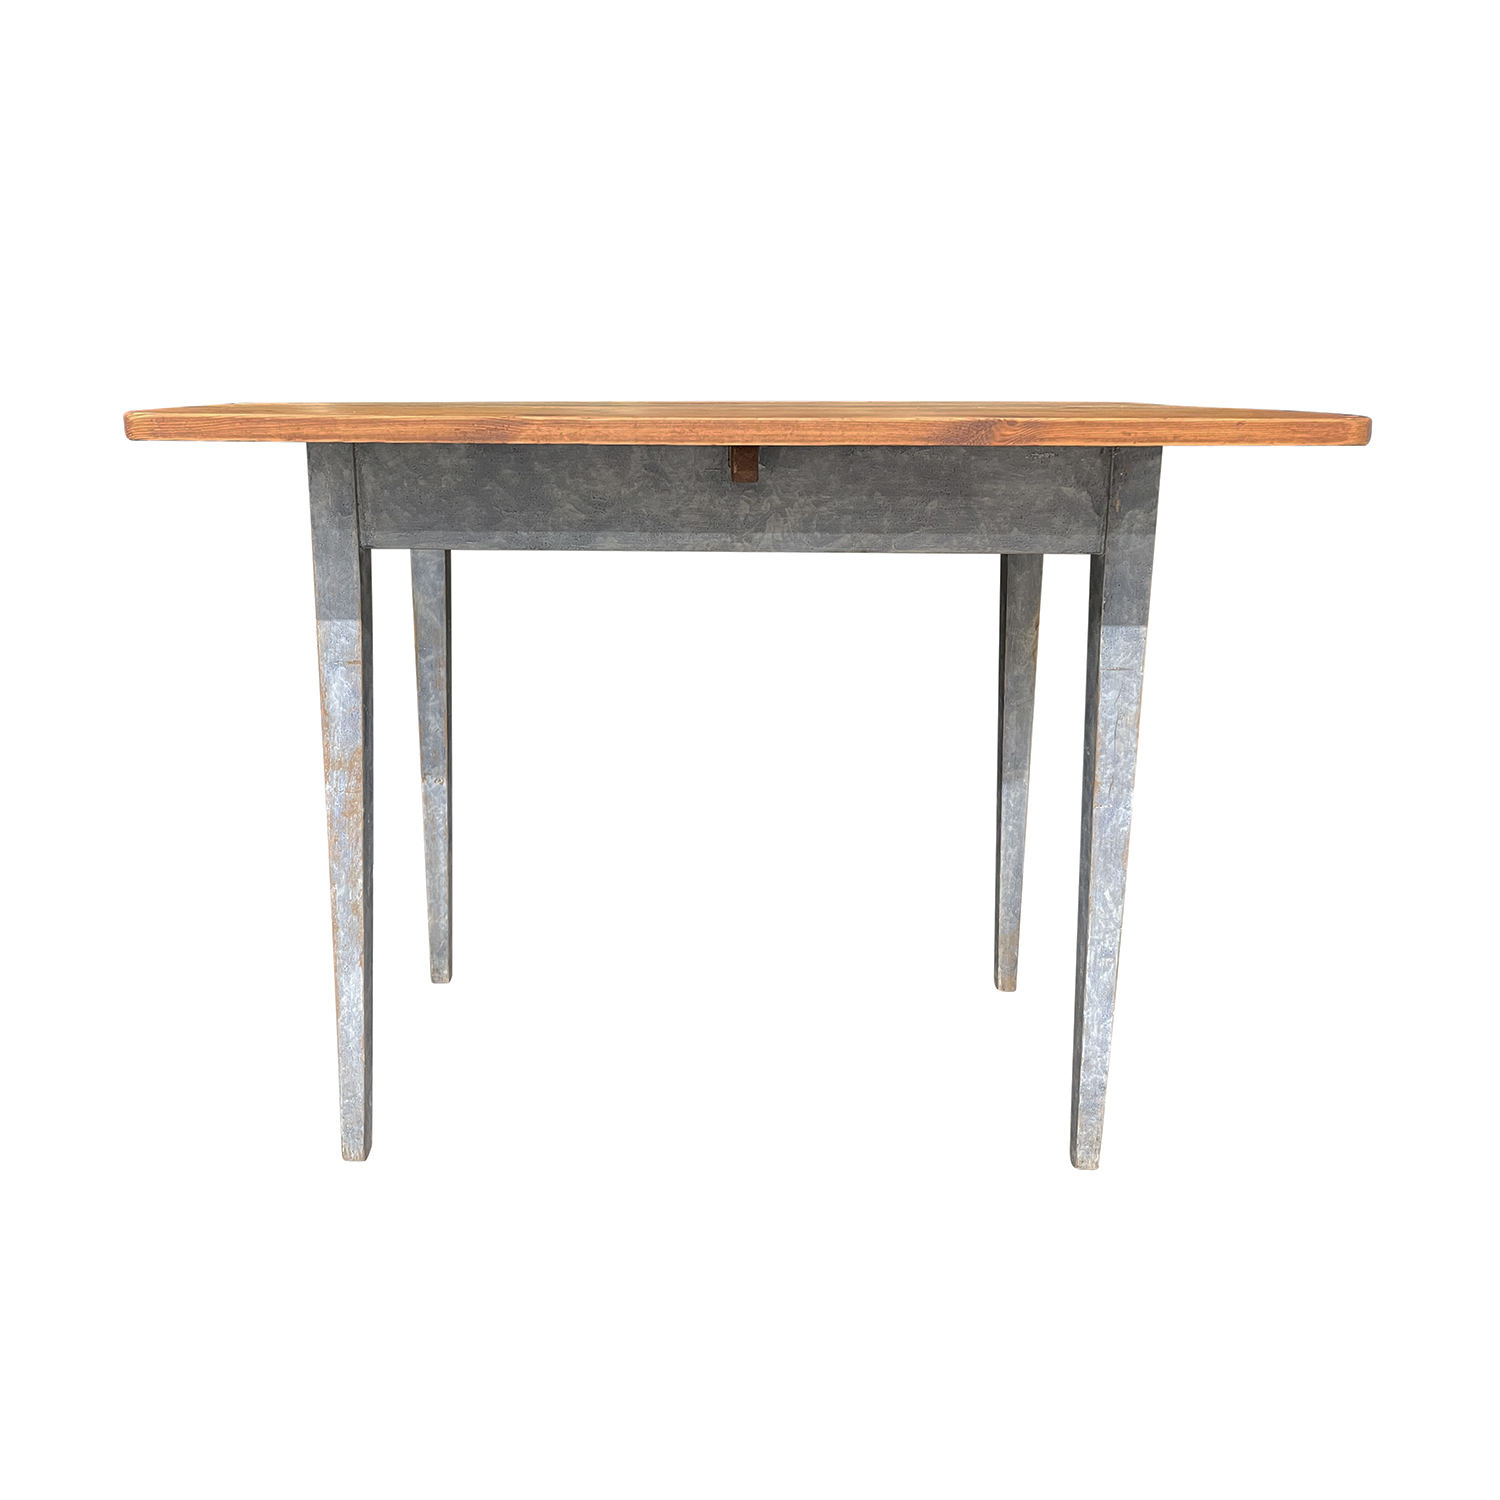 19th Century Swedish Gustavian Pinewood Drop Leaf Table – Antique Kitchen Table